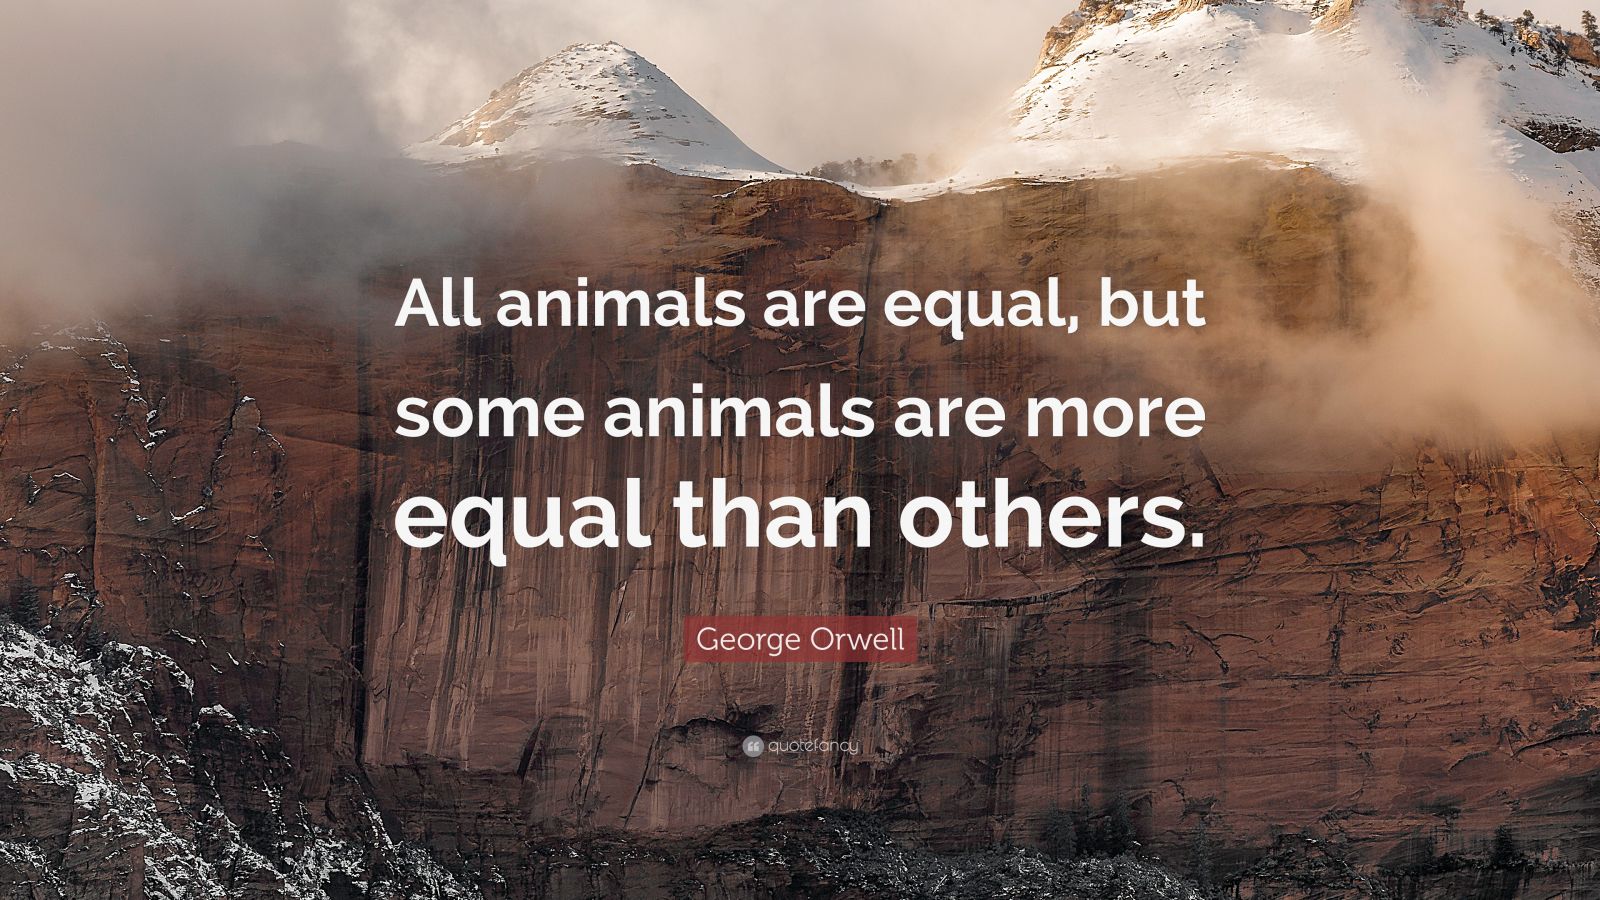 George Orwell Quote: All animals are equal but some animals are more